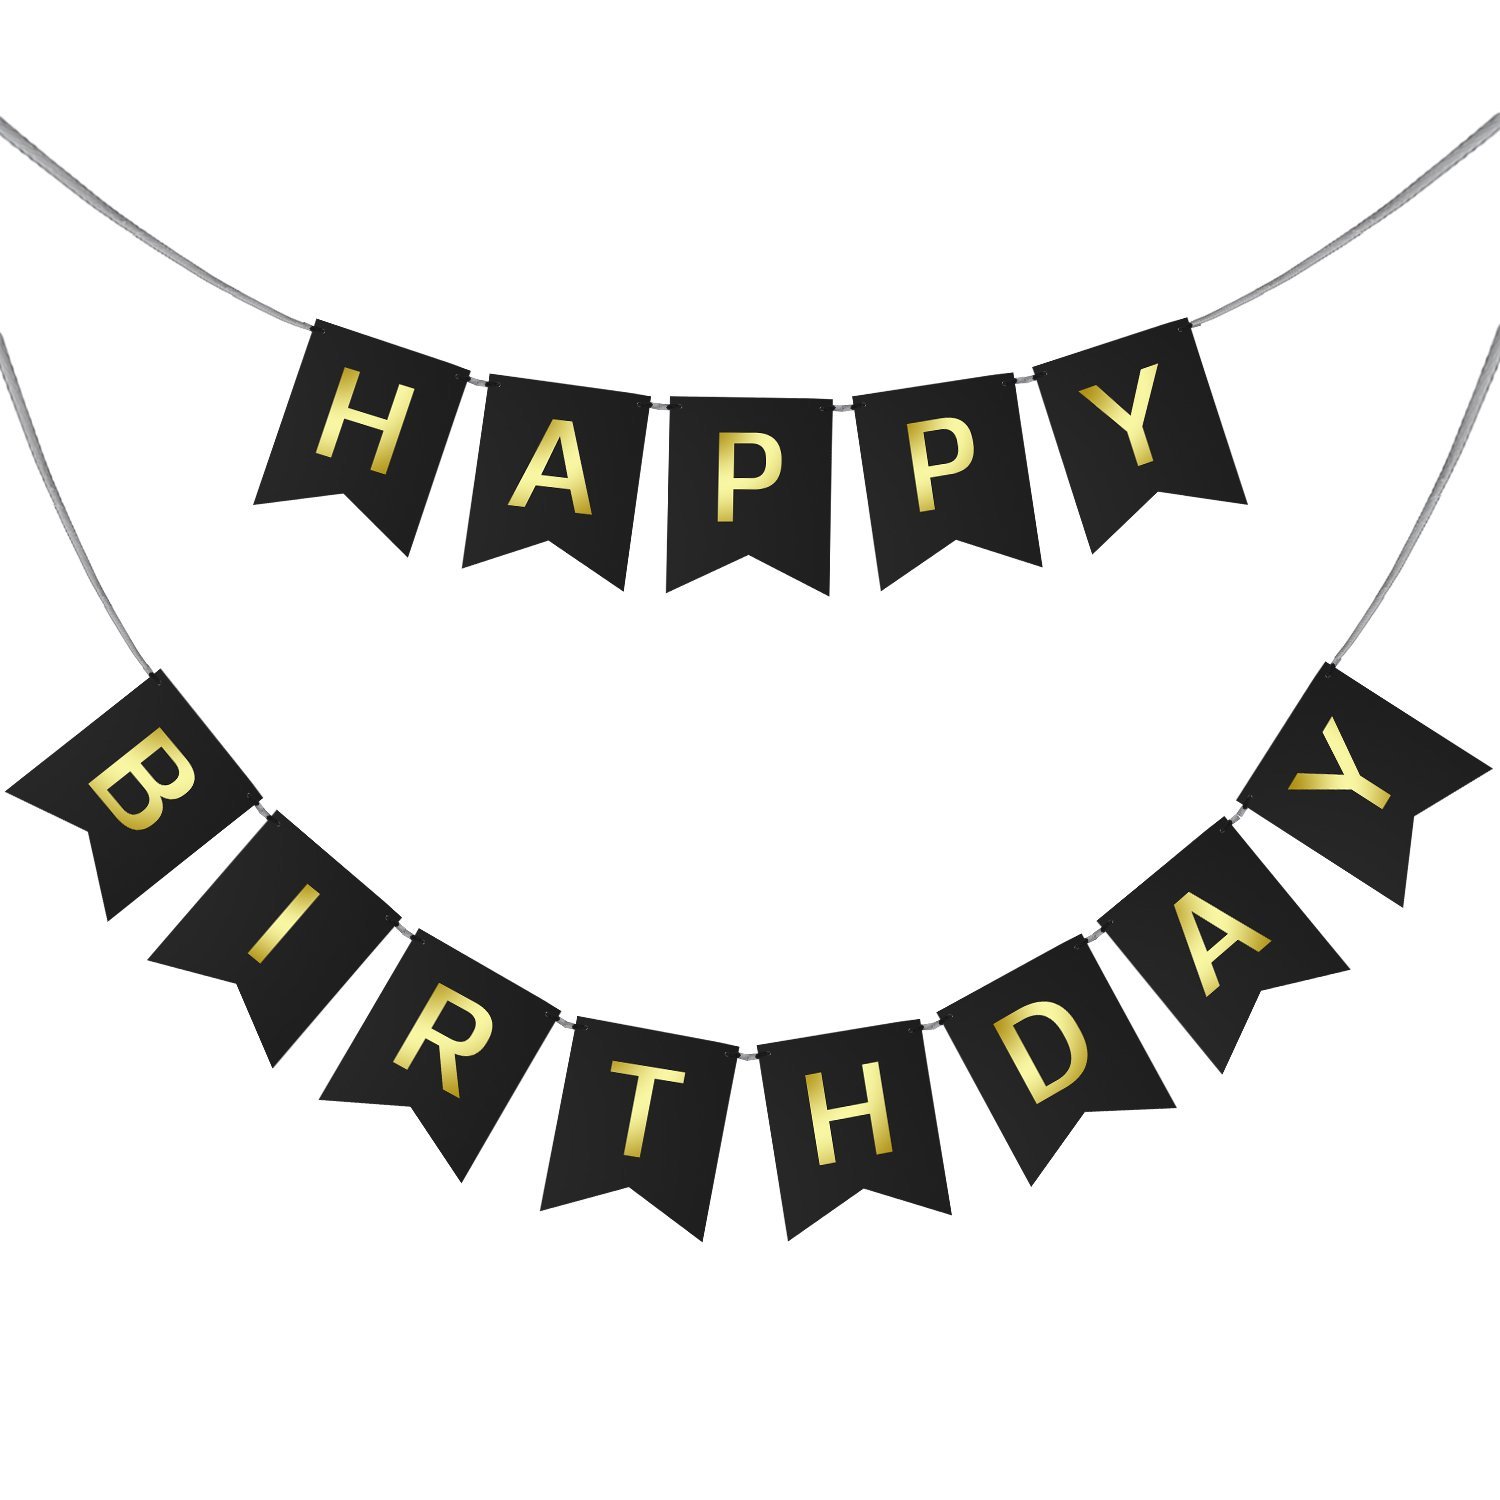 Happy Birthday Swallowtail Bunting Banner for Party Decoration, Black ...